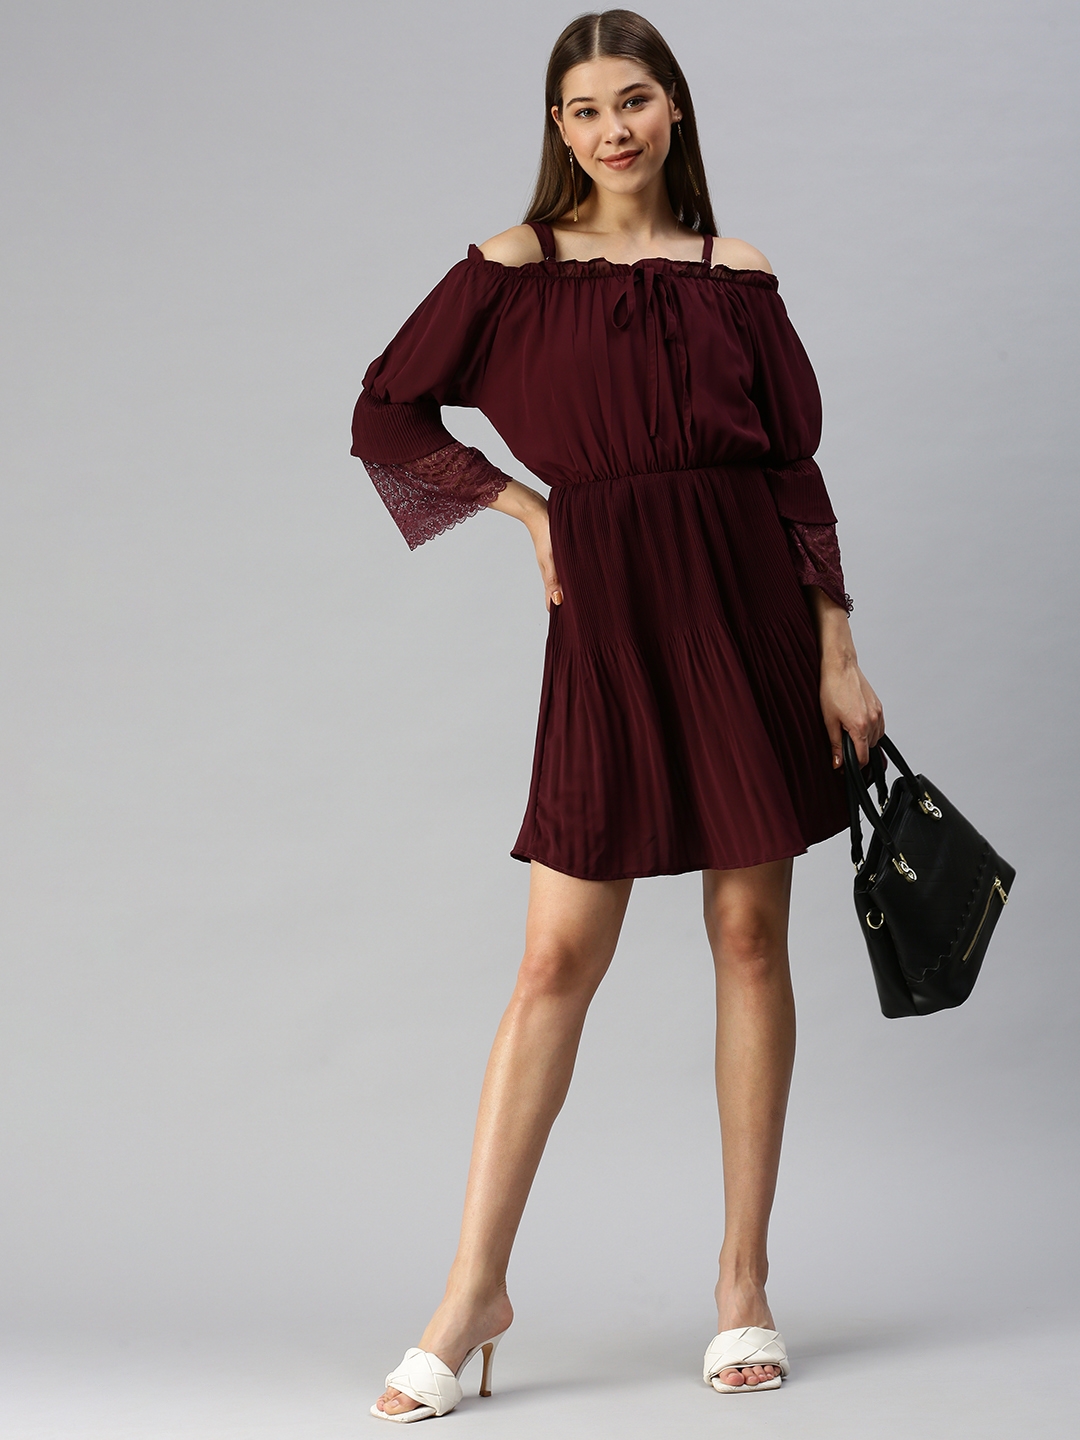 Women's Brown Polyester Solid Dresses